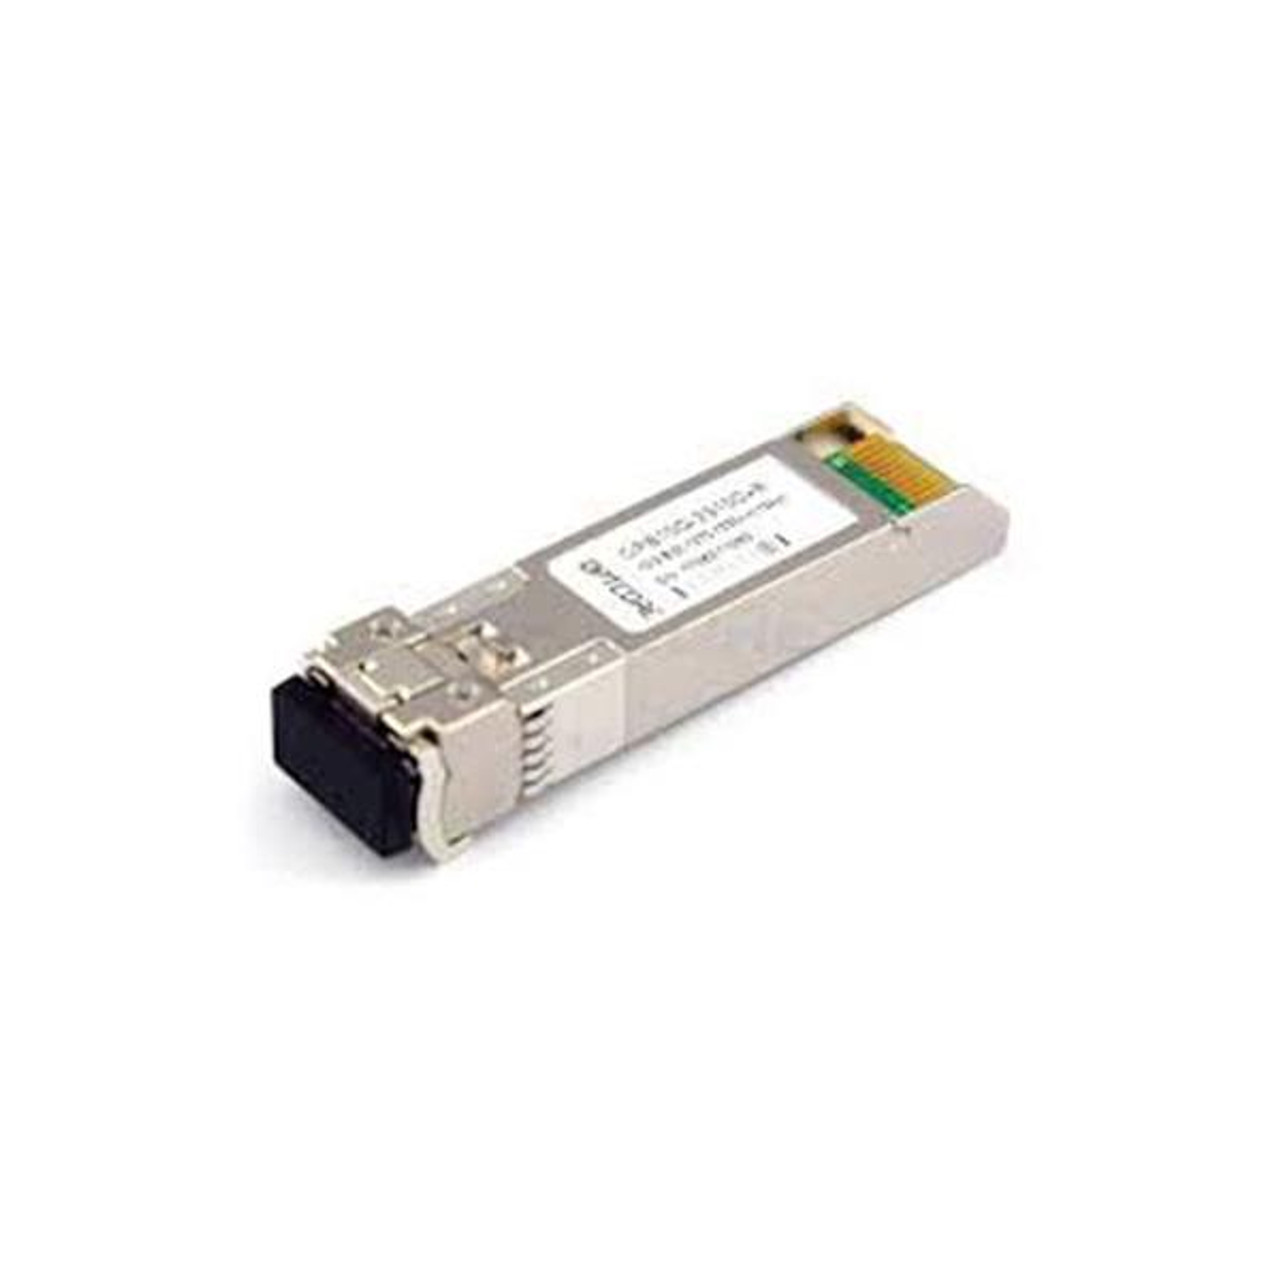 10G-SFPP-BXU-S Brocade 10Gbps 10GBase-BX10-U Single-mode Fiber 10km 1270nmTX/1330nmRX LC Connector SFP+ Transceiver Module with DOM